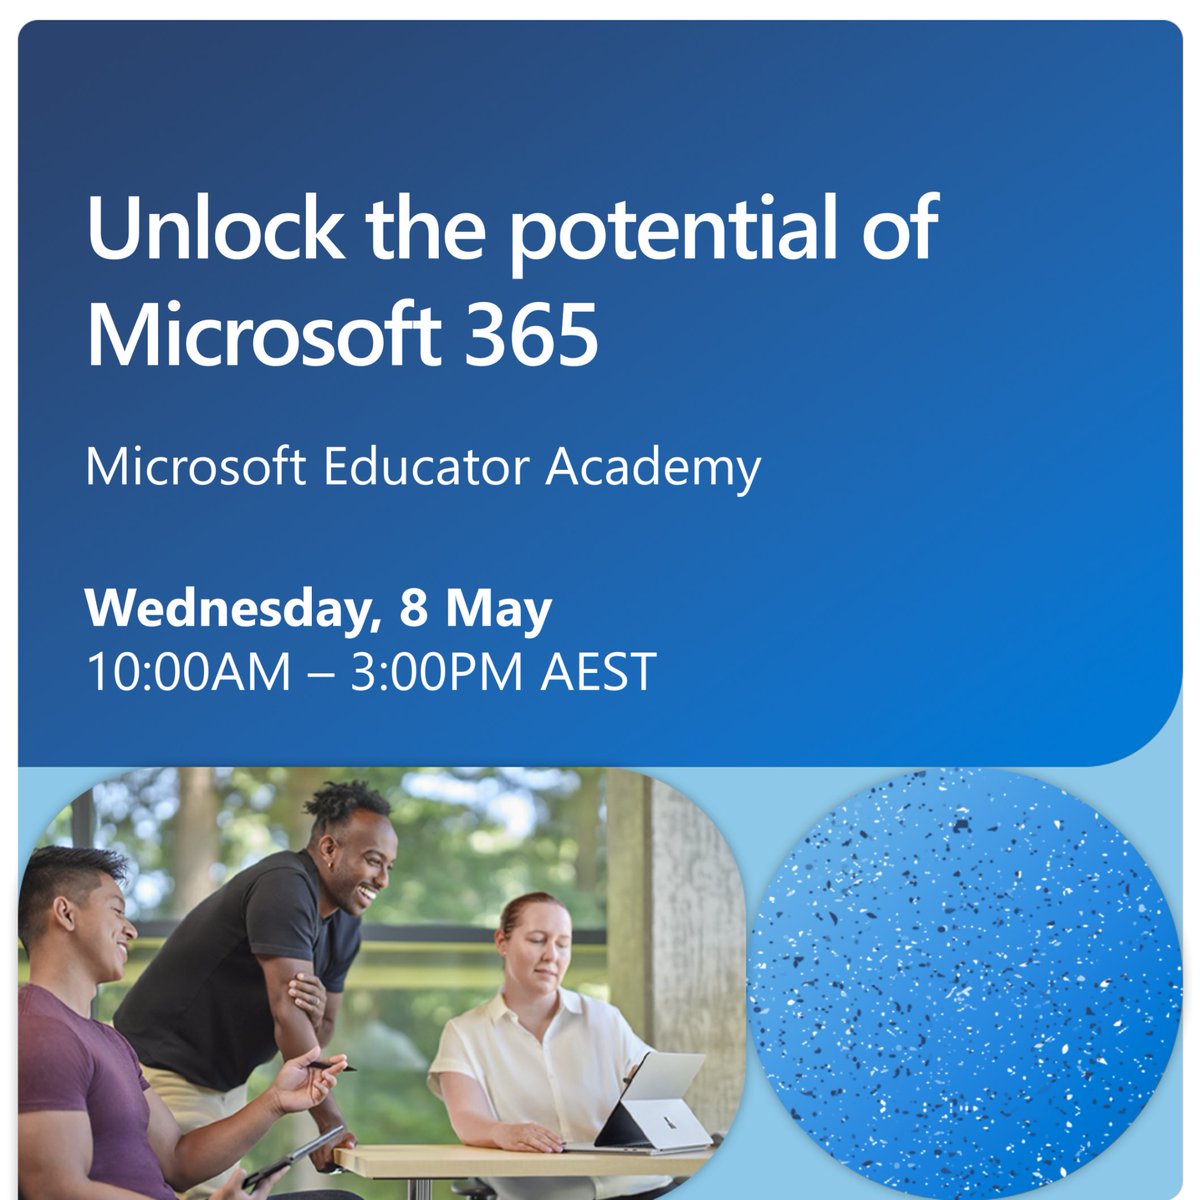 Educators 📣 enhance your skills in using Microsoft tools in your classroom. Join us online for a day of immersive activities and discover how to use technology to improve instruction and meet the learning needs of your students. Register now: msft.it/6016YHCGE